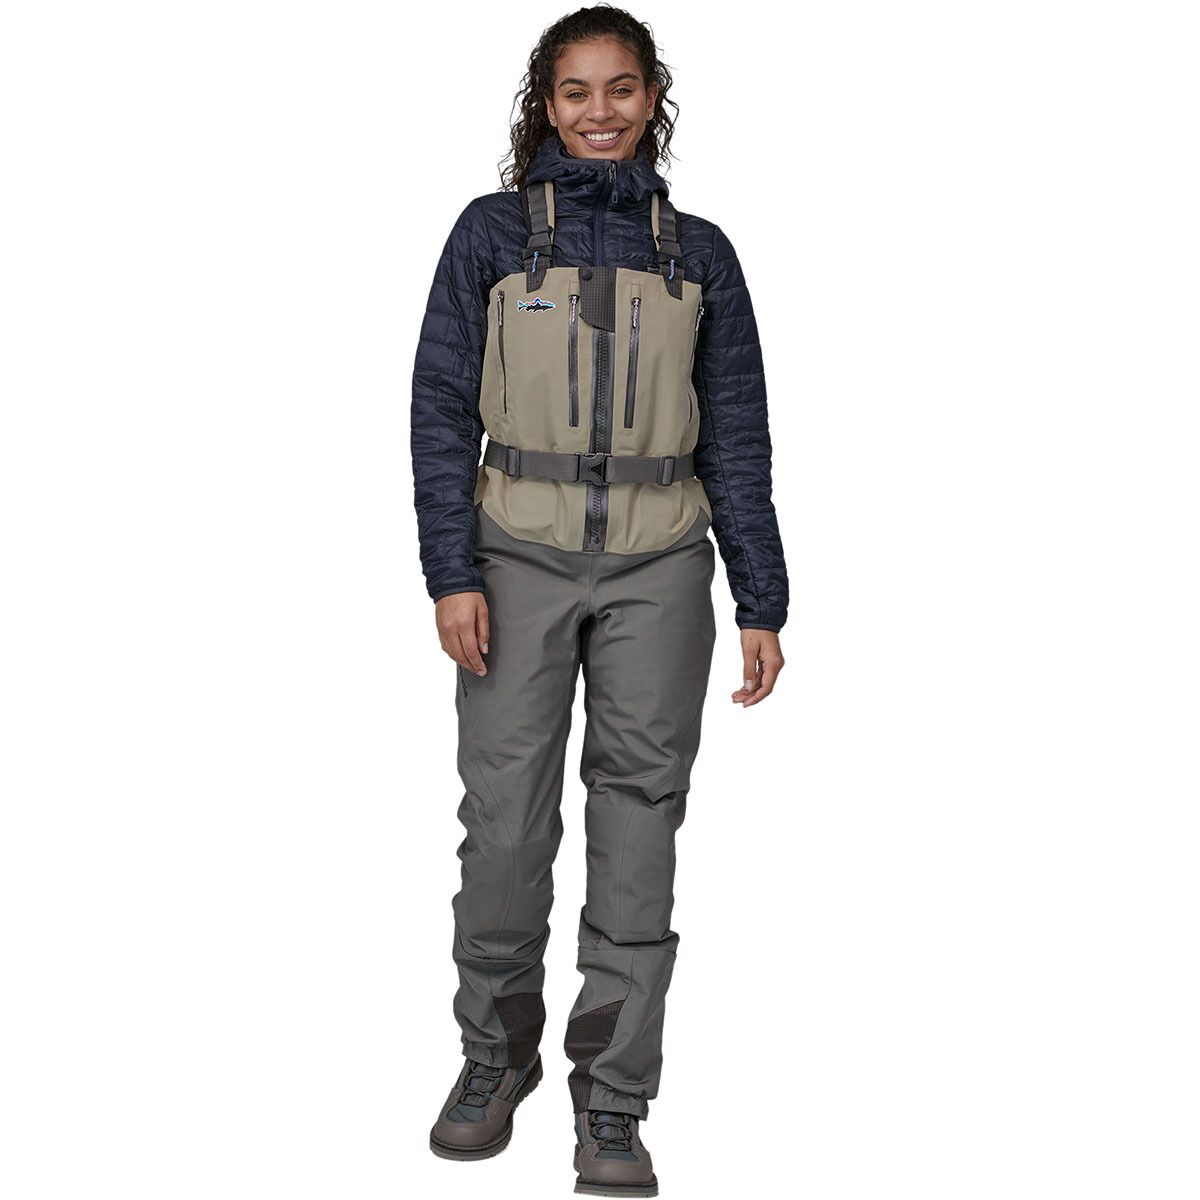 Patagonia Swiftcurrent Expedition Zip-front Waders - Women's